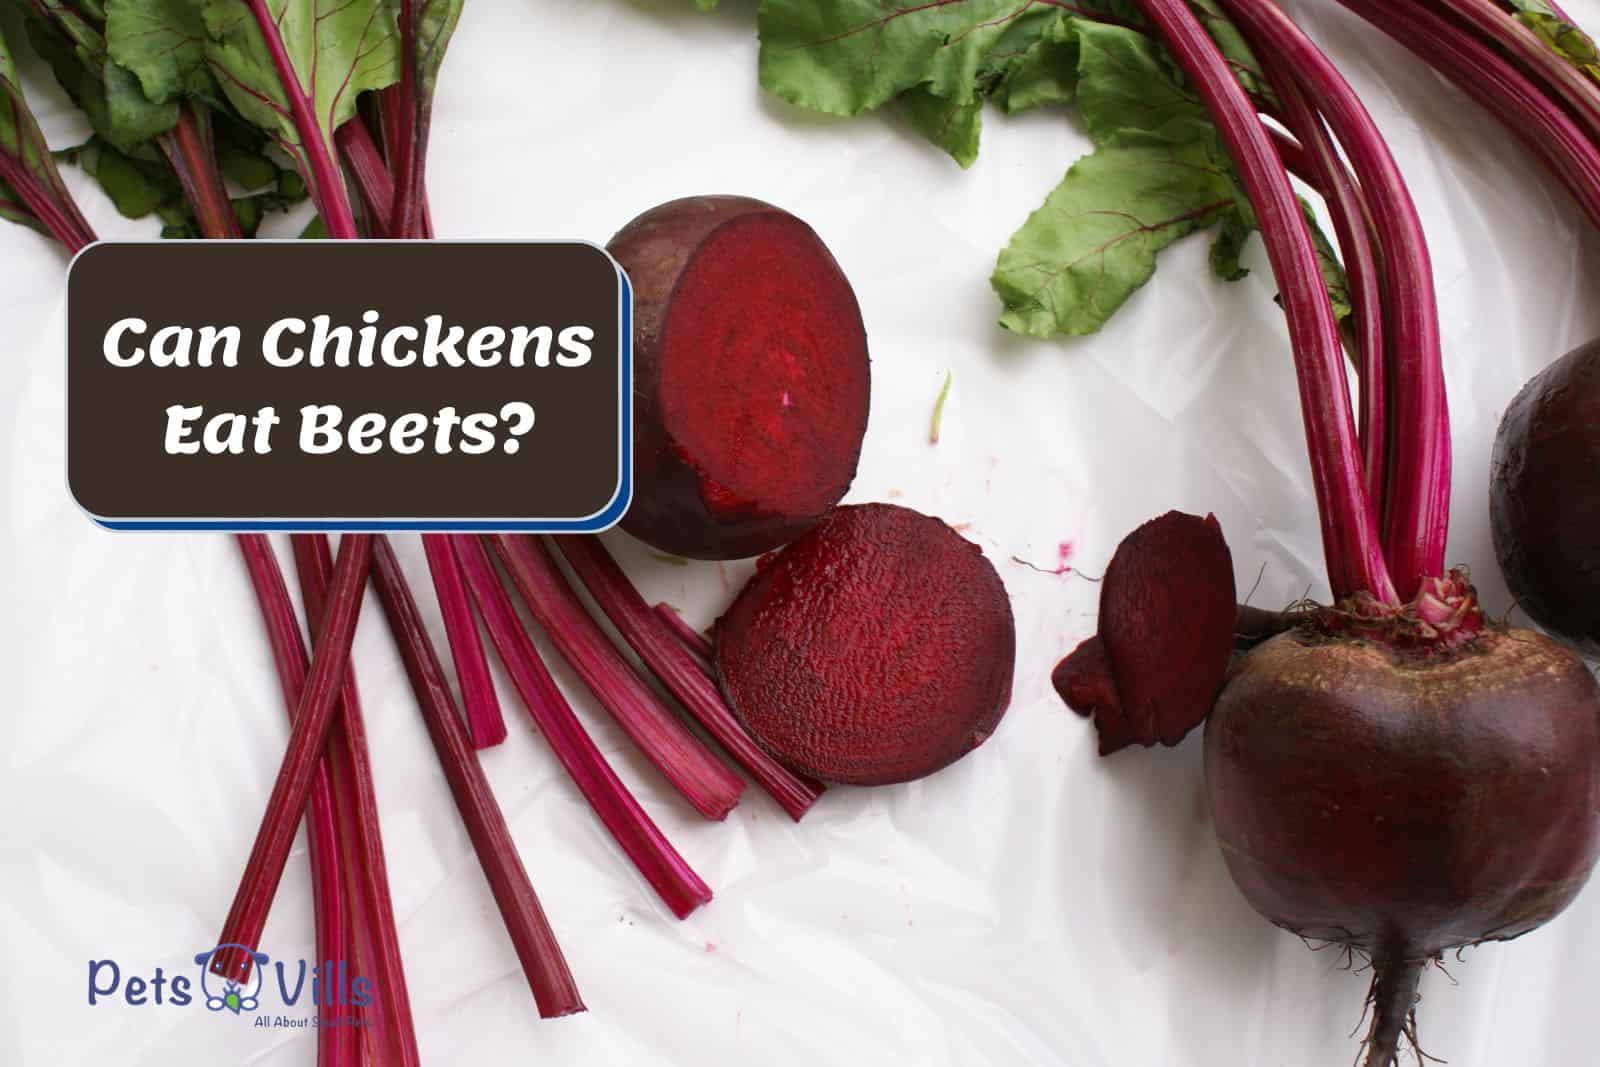 slices of beets; Can Chickens Eat Beets?